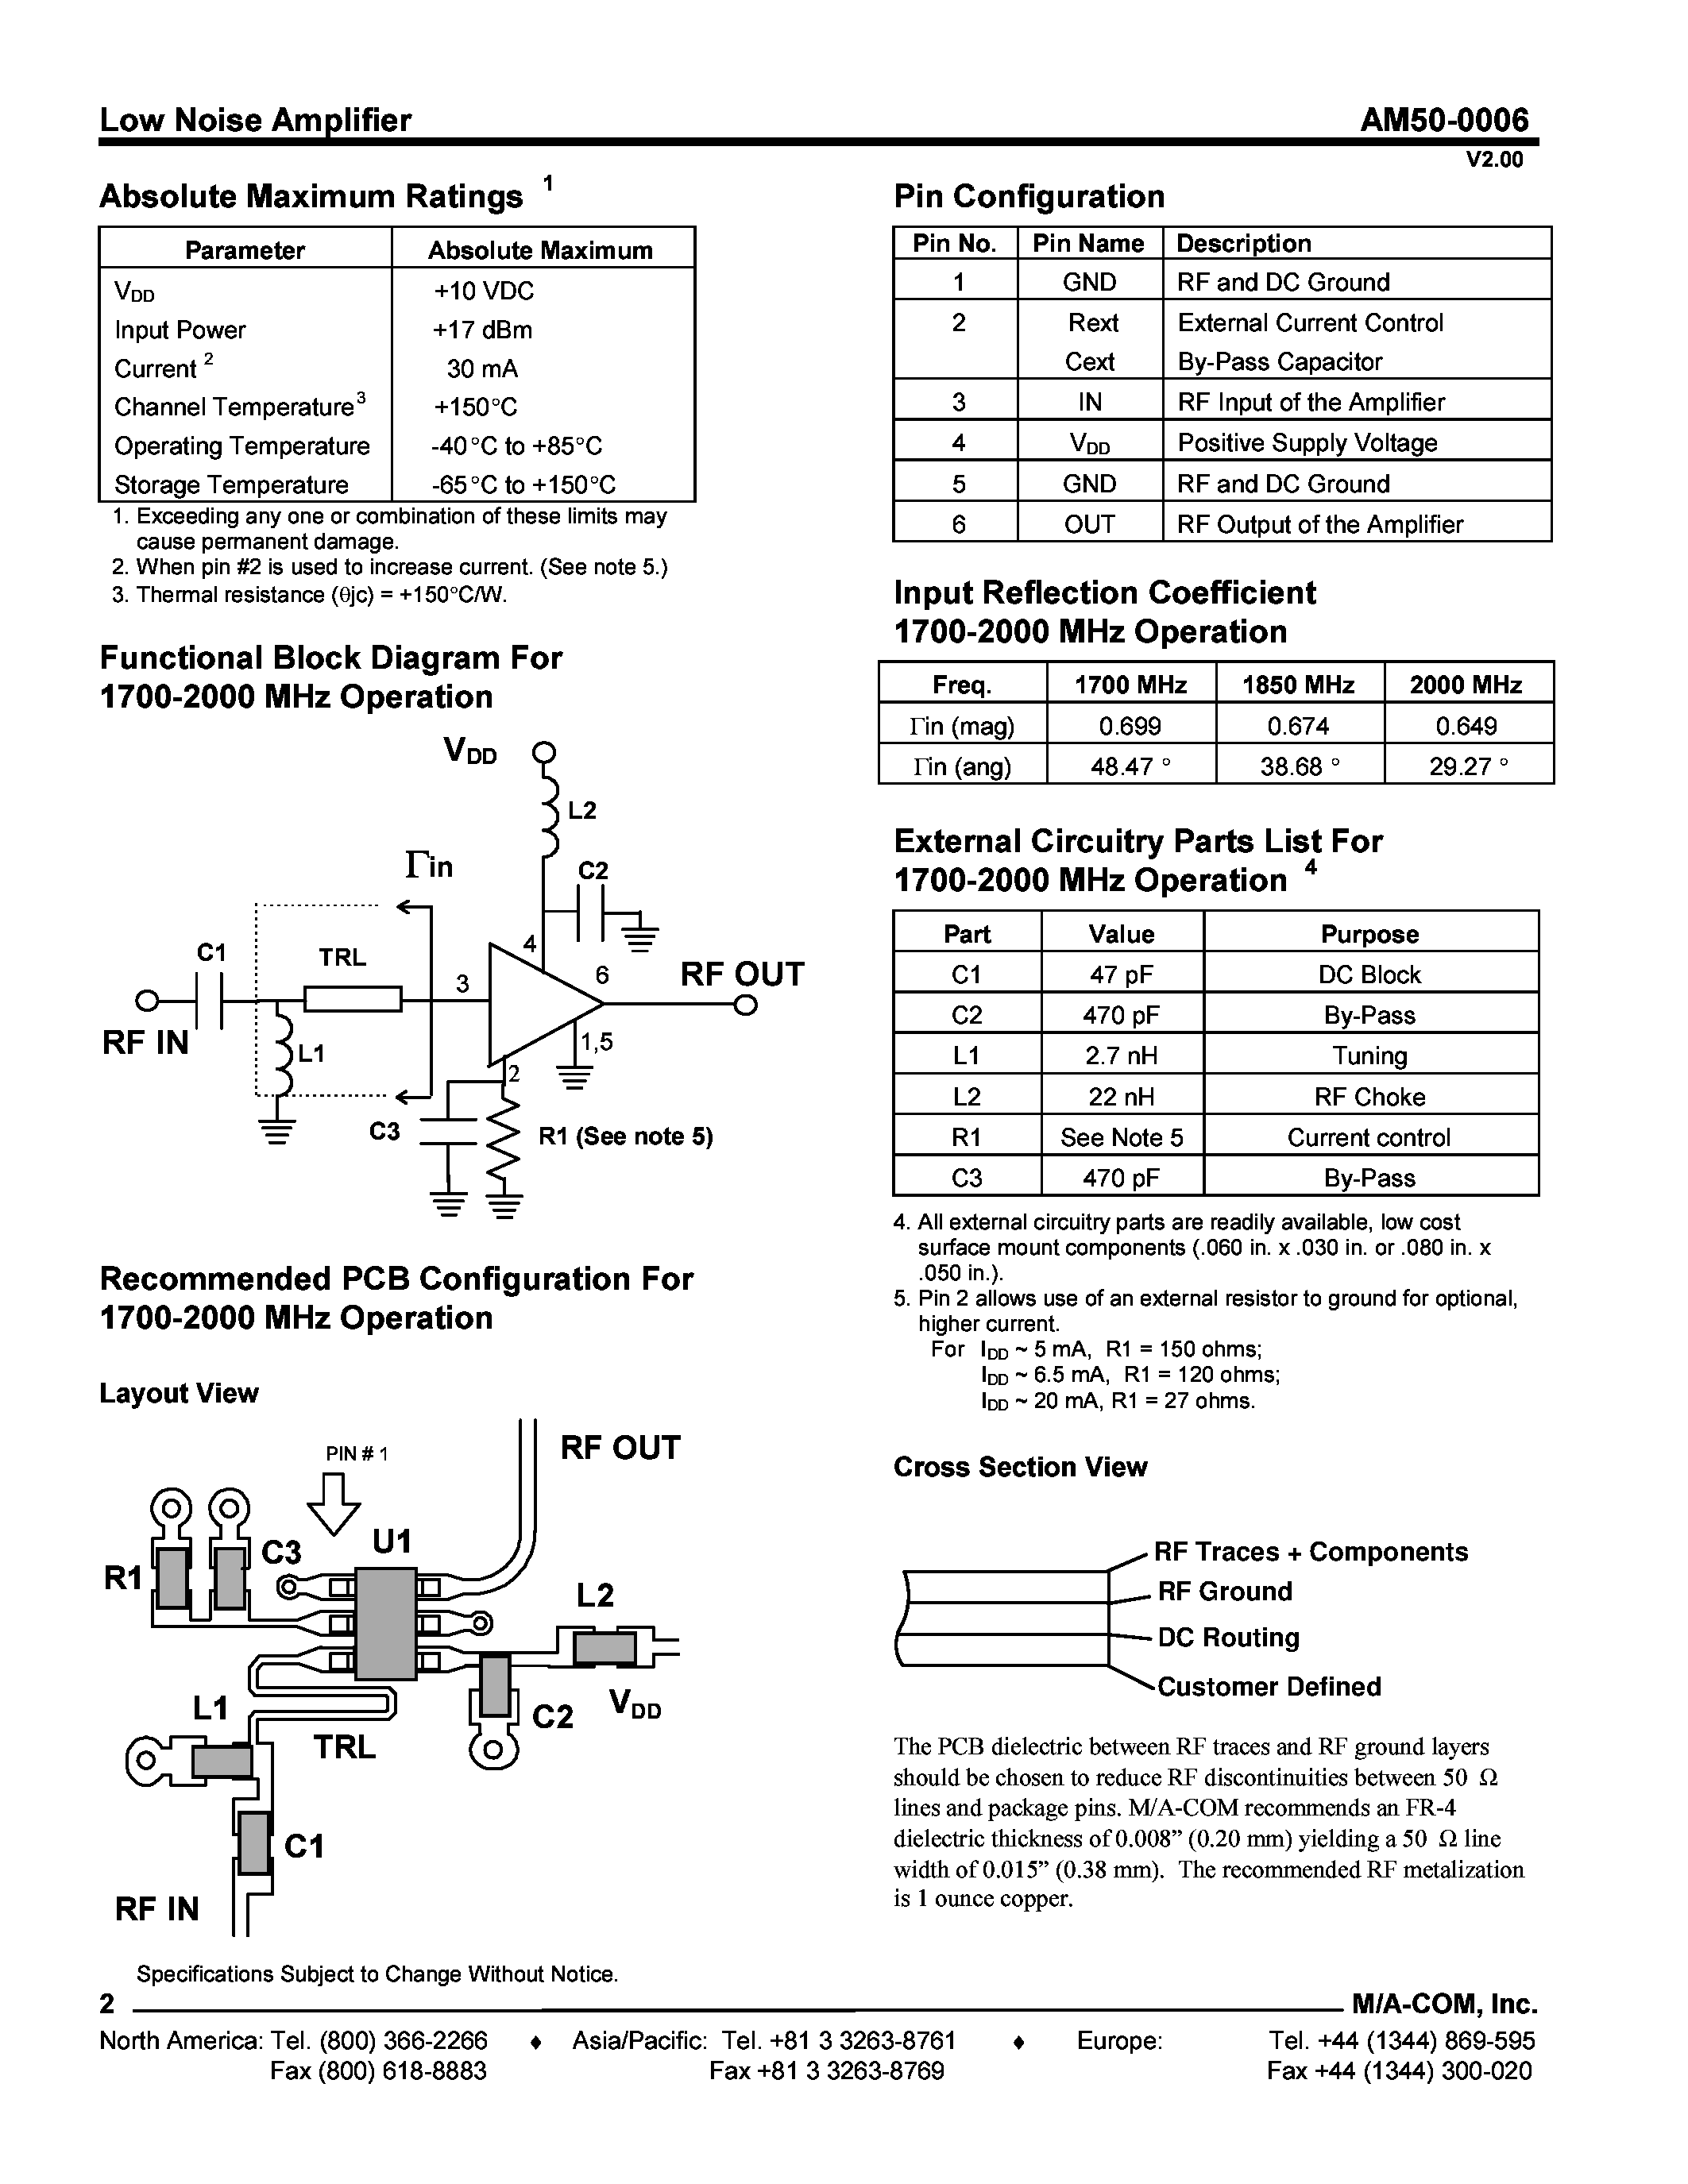 Datasheet AM50-0006V2 - Low Noise Amplifier page 2